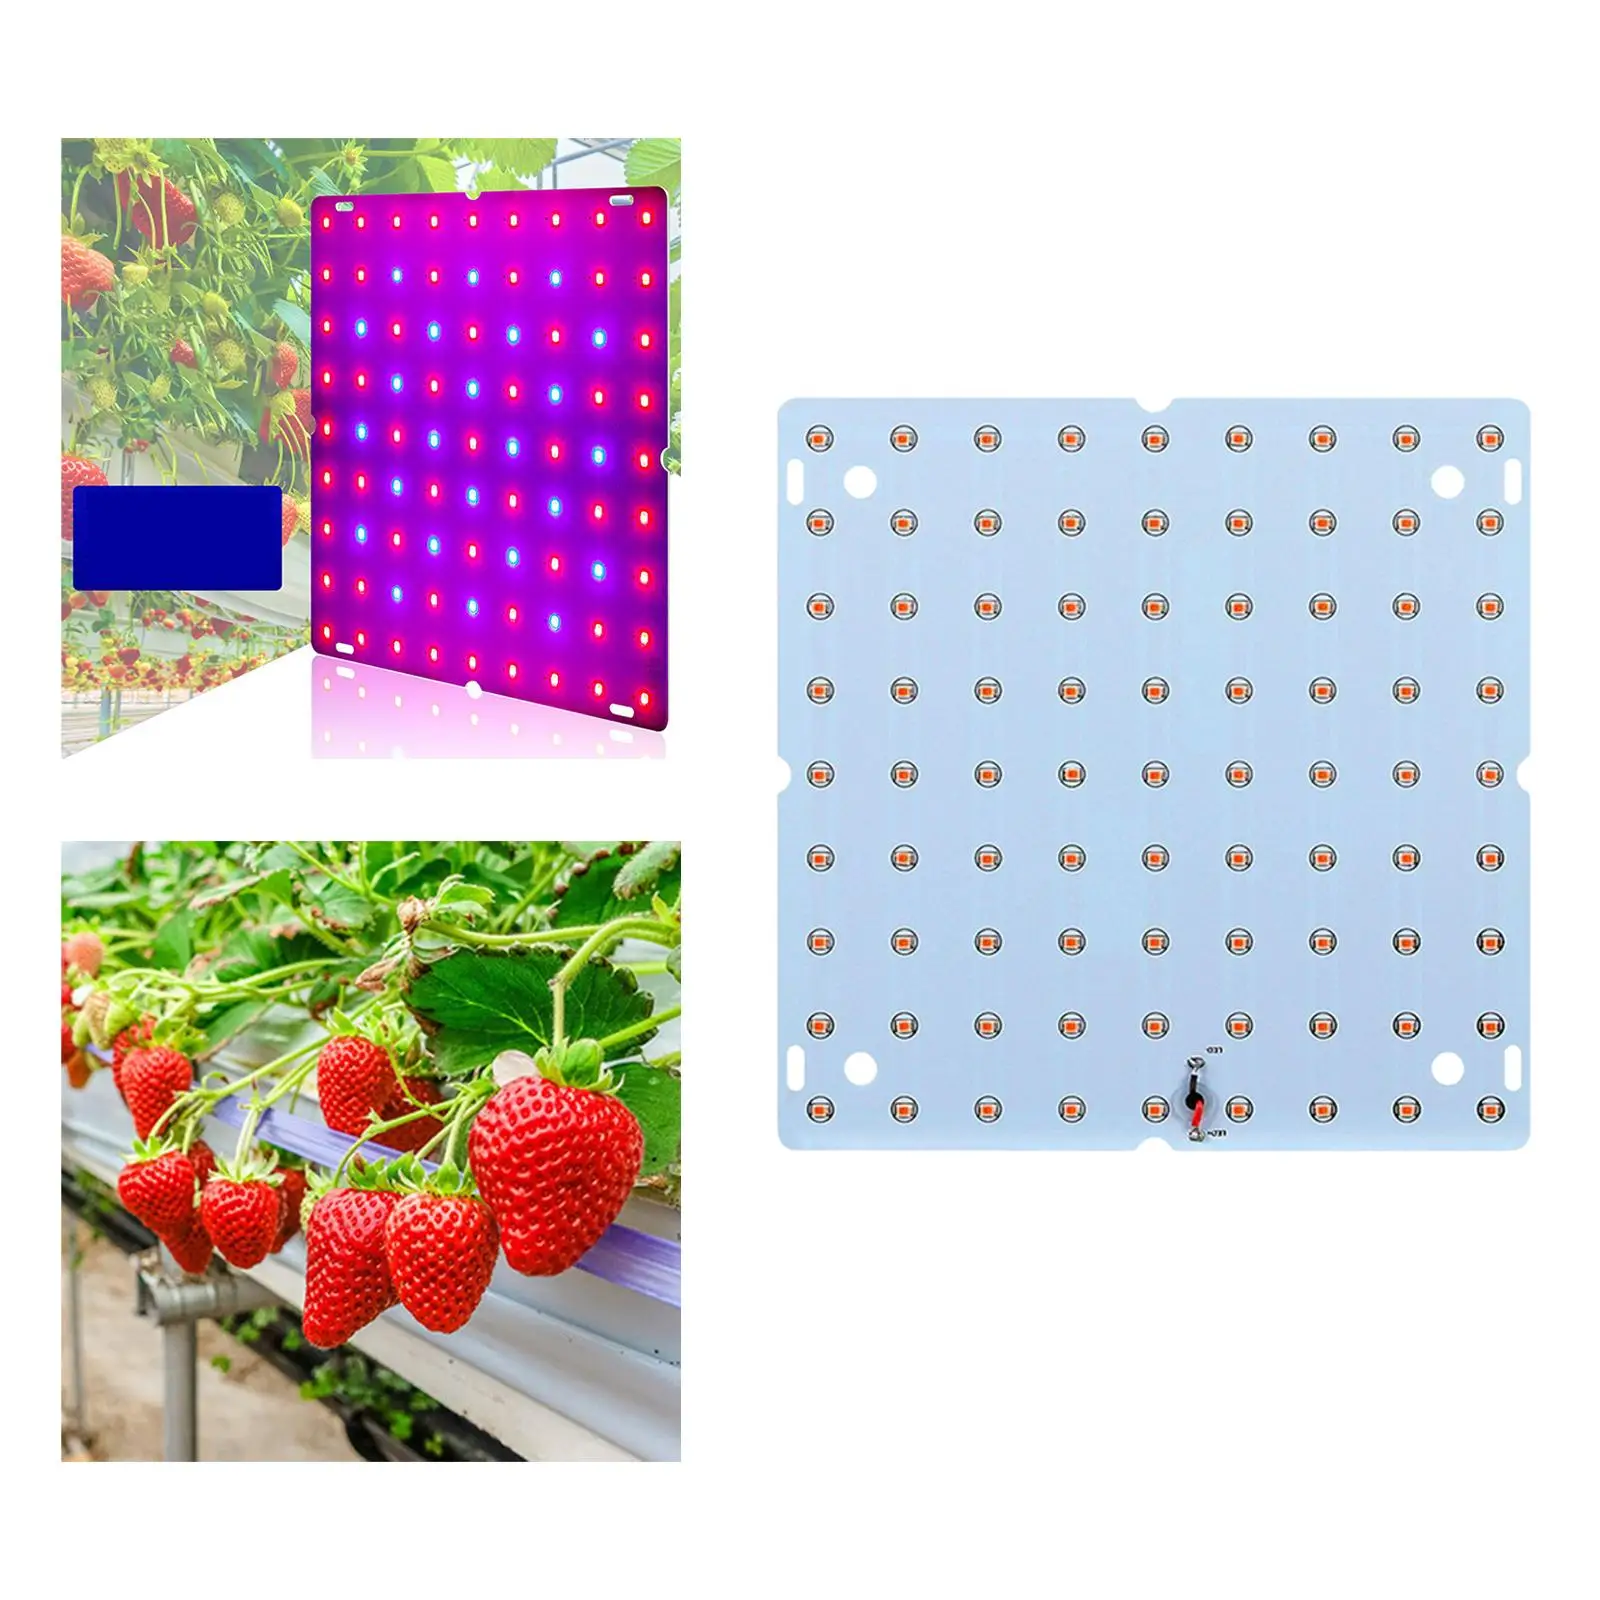 Aluminum Alloy Plant Grow Light 1091LM Full Grow Light for Flower Bloom Hydroponics Vegetable Seed Starting Greenhouse